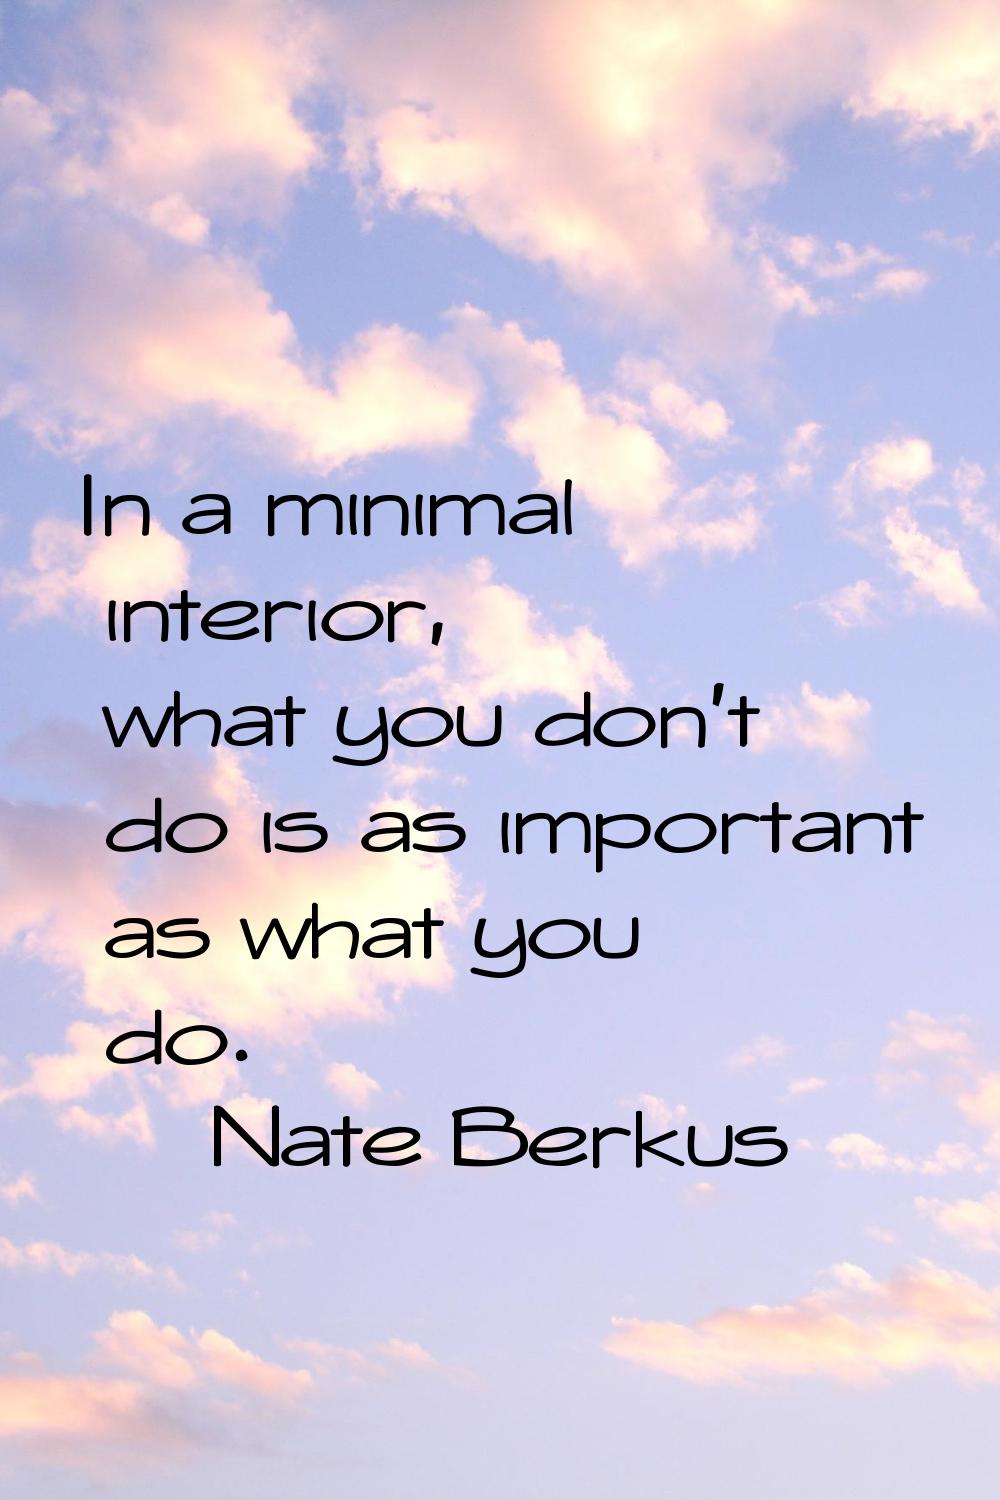 In a minimal interior, what you don't do is as important as what you do.